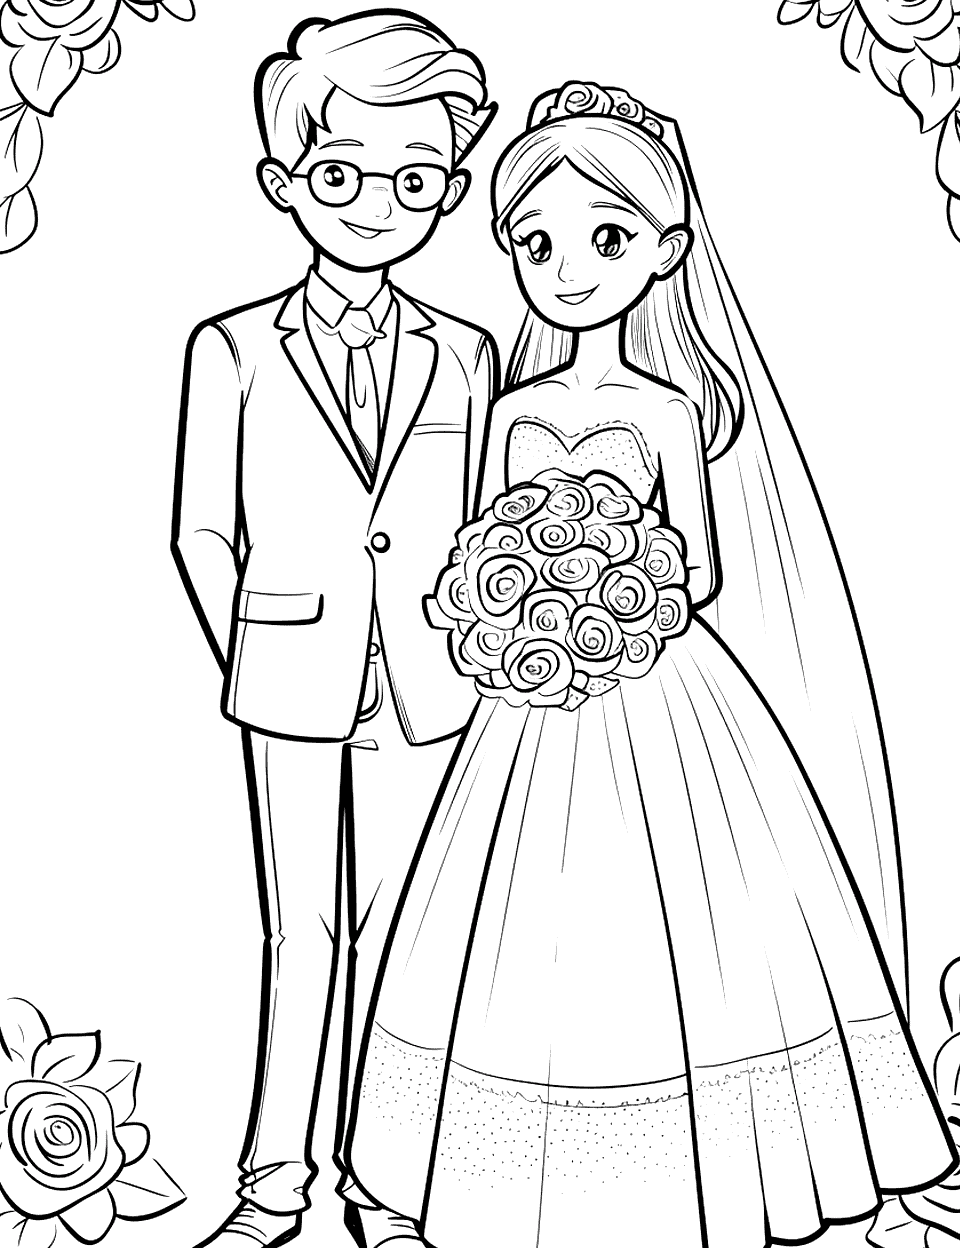 Anime-Style Newlyweds Wedding Coloring Page - An anime-inspired bride and groom, with exaggerated cute features.